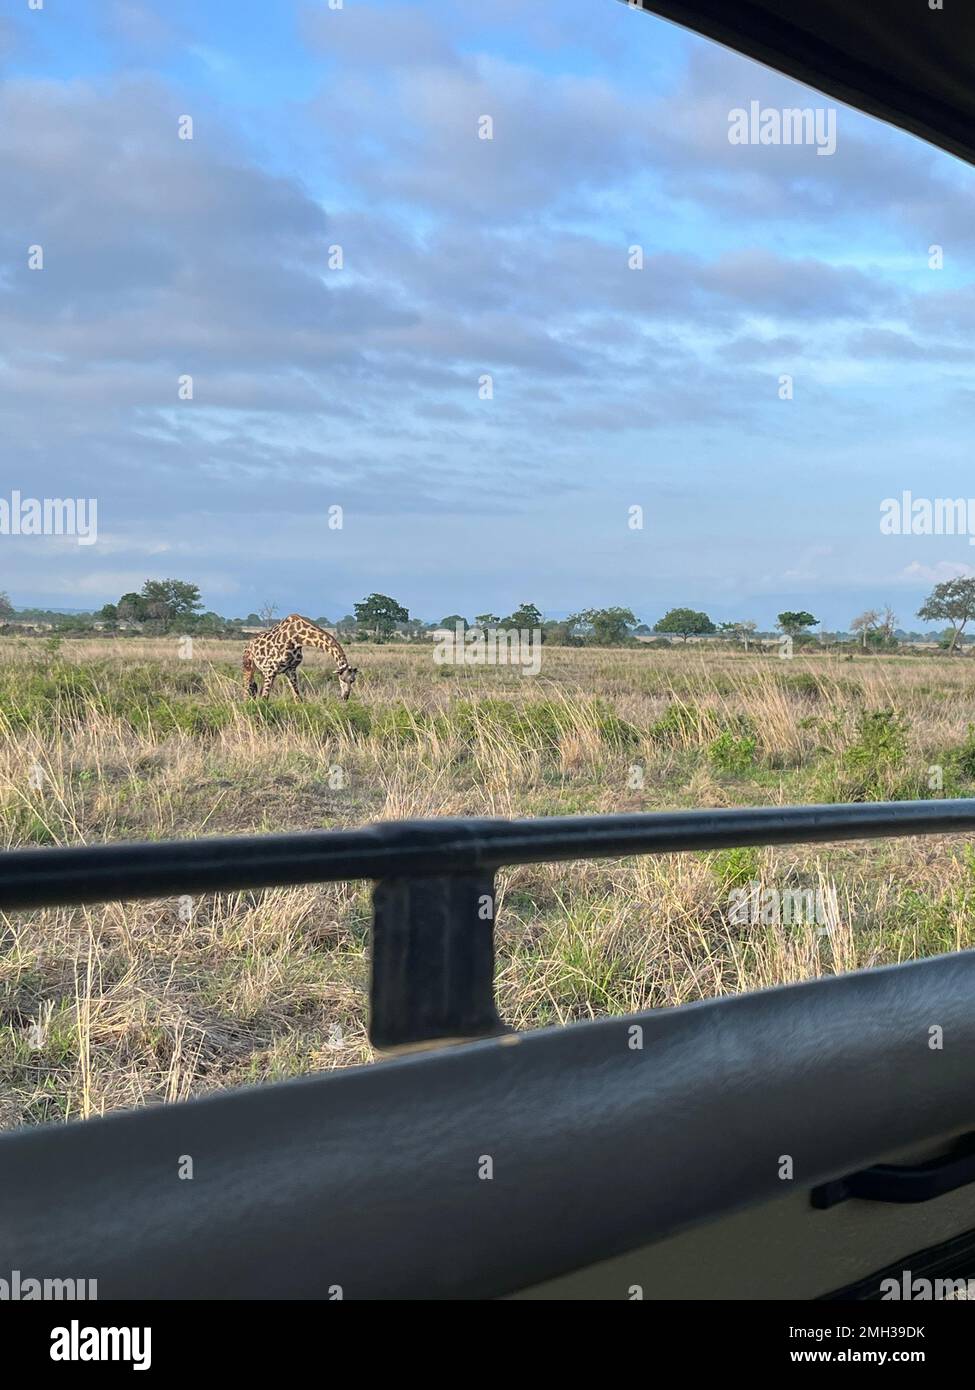 a picture view from the roof of a convertibles jeep truck from inside view for safari shows a wild animal giraffe in the field. Uncovered jeep car for Stock Photo